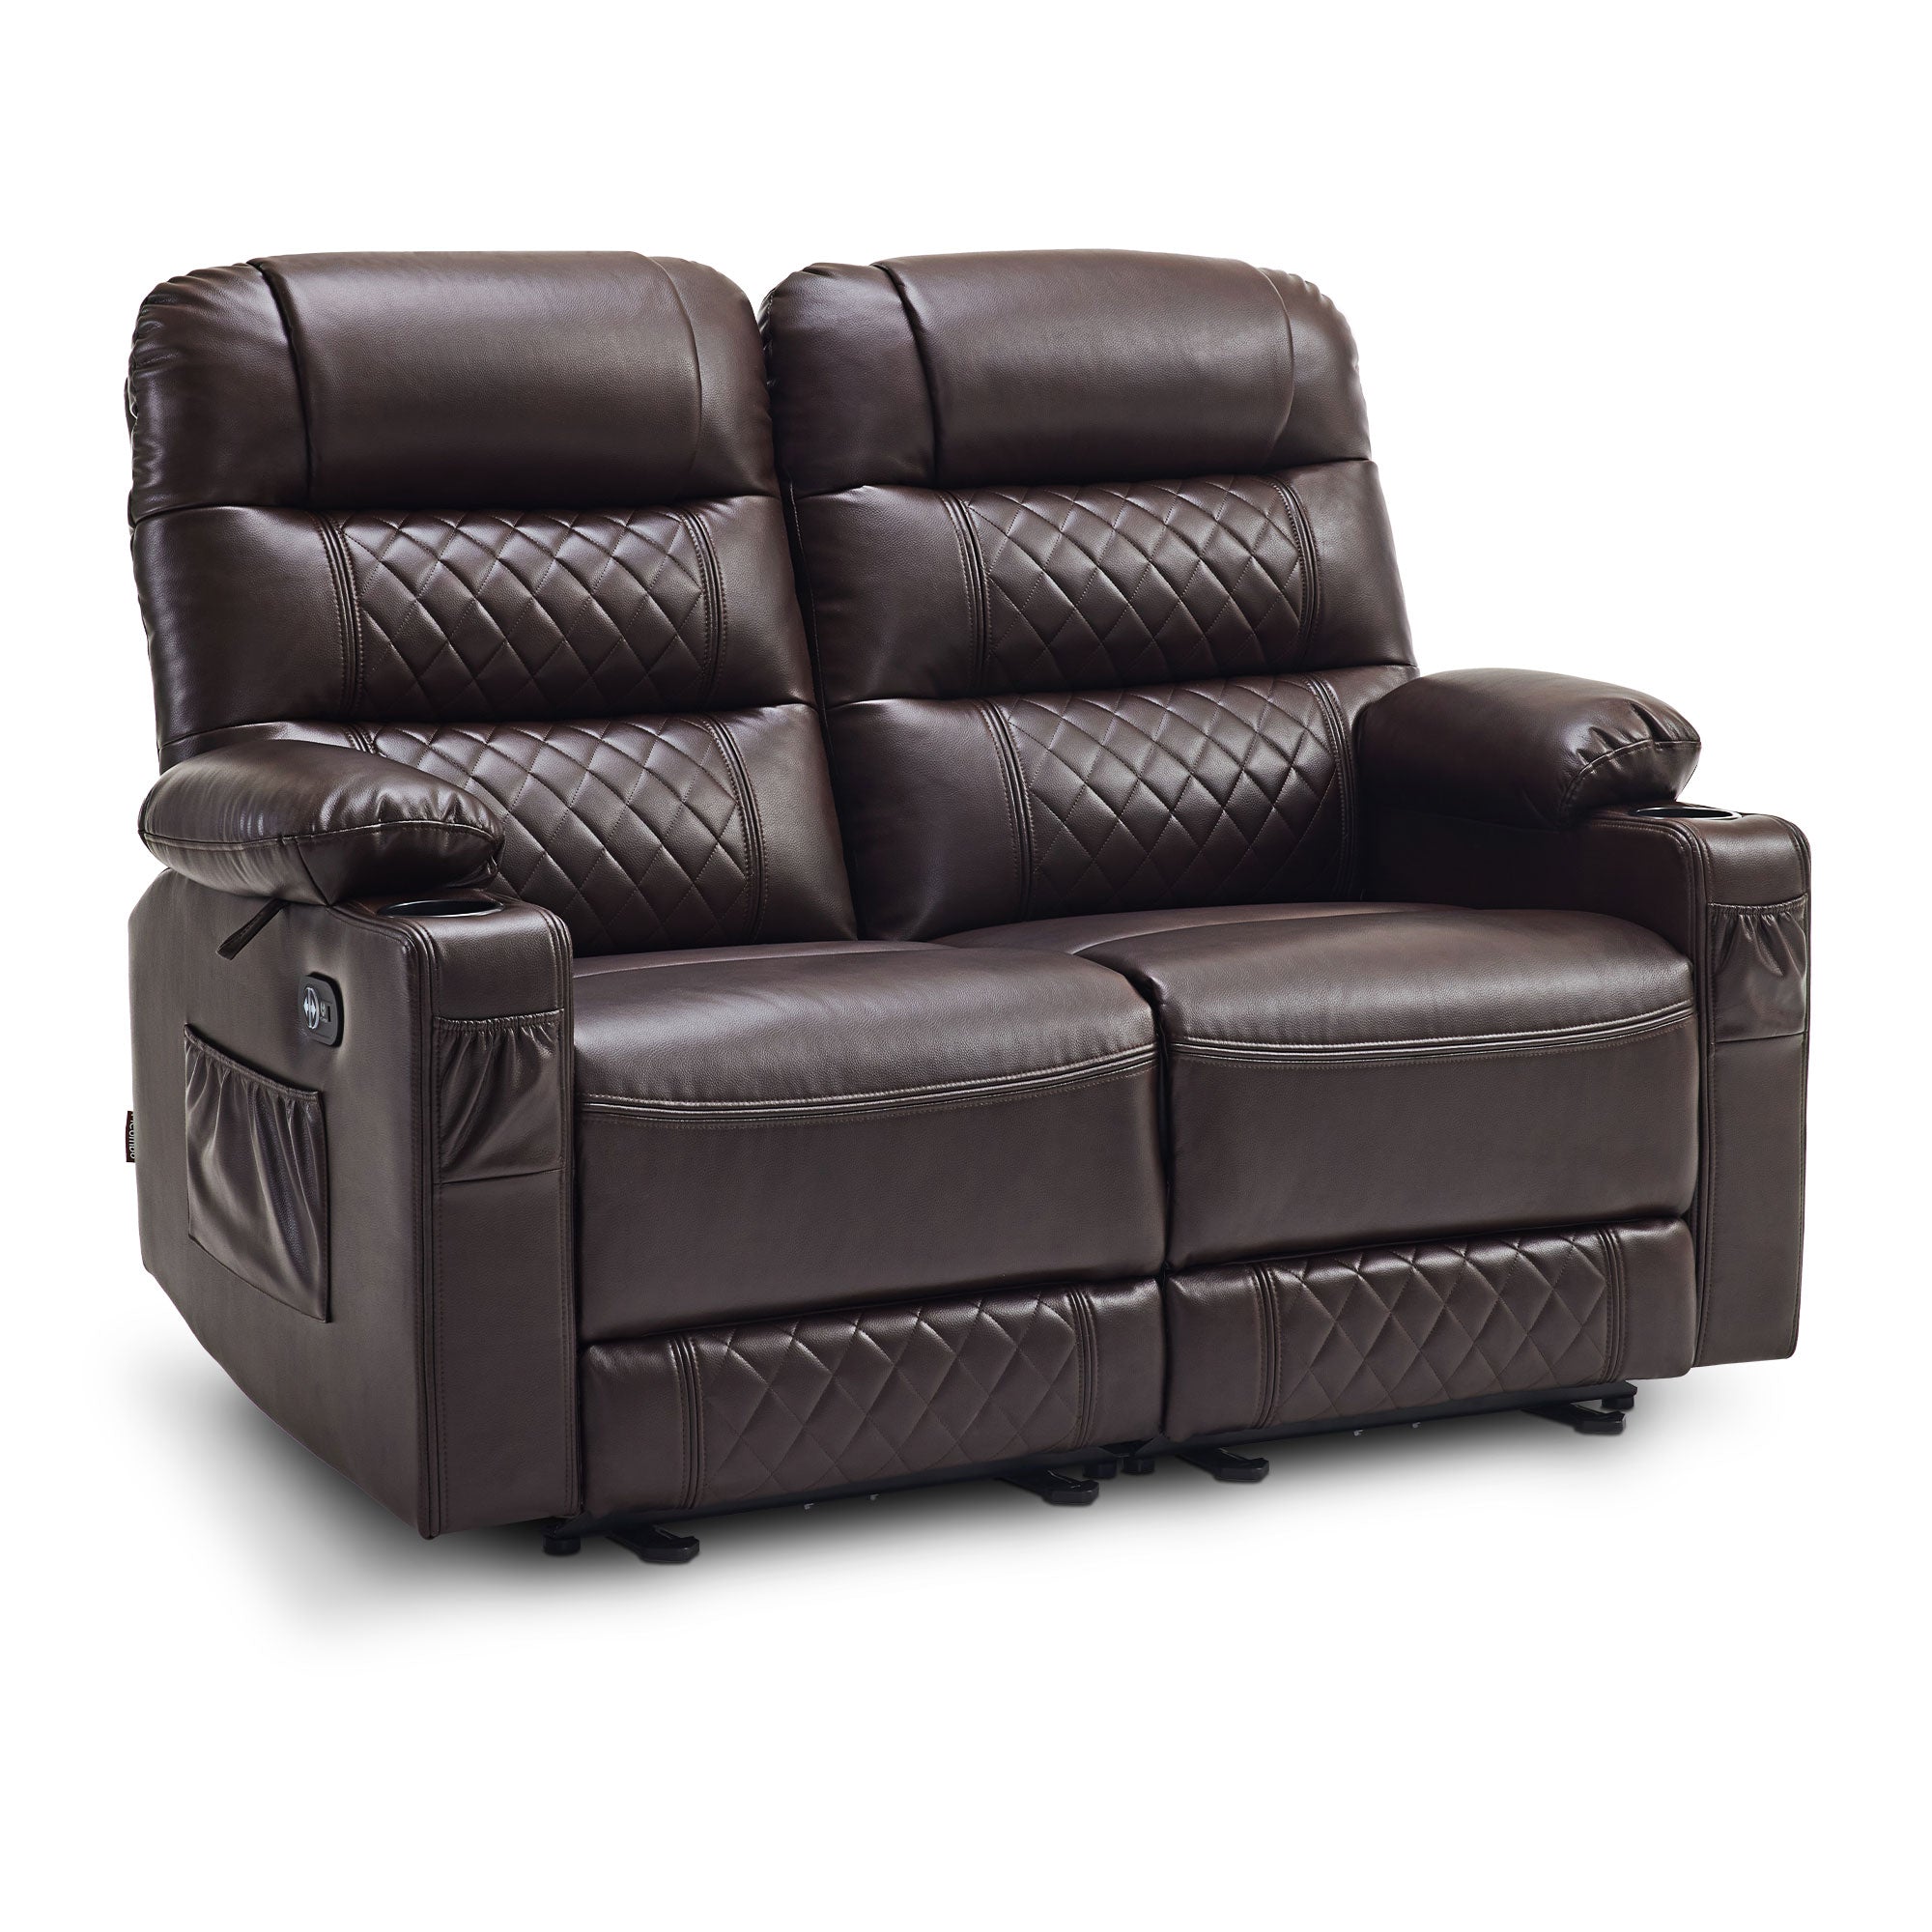 MCombo Electric Power Loveseat Recliner with Console, Faux Leather Power Reclining Sofa with Heat and Vibration, USB Ports, Cup Holders for Living Room 6160-PR622